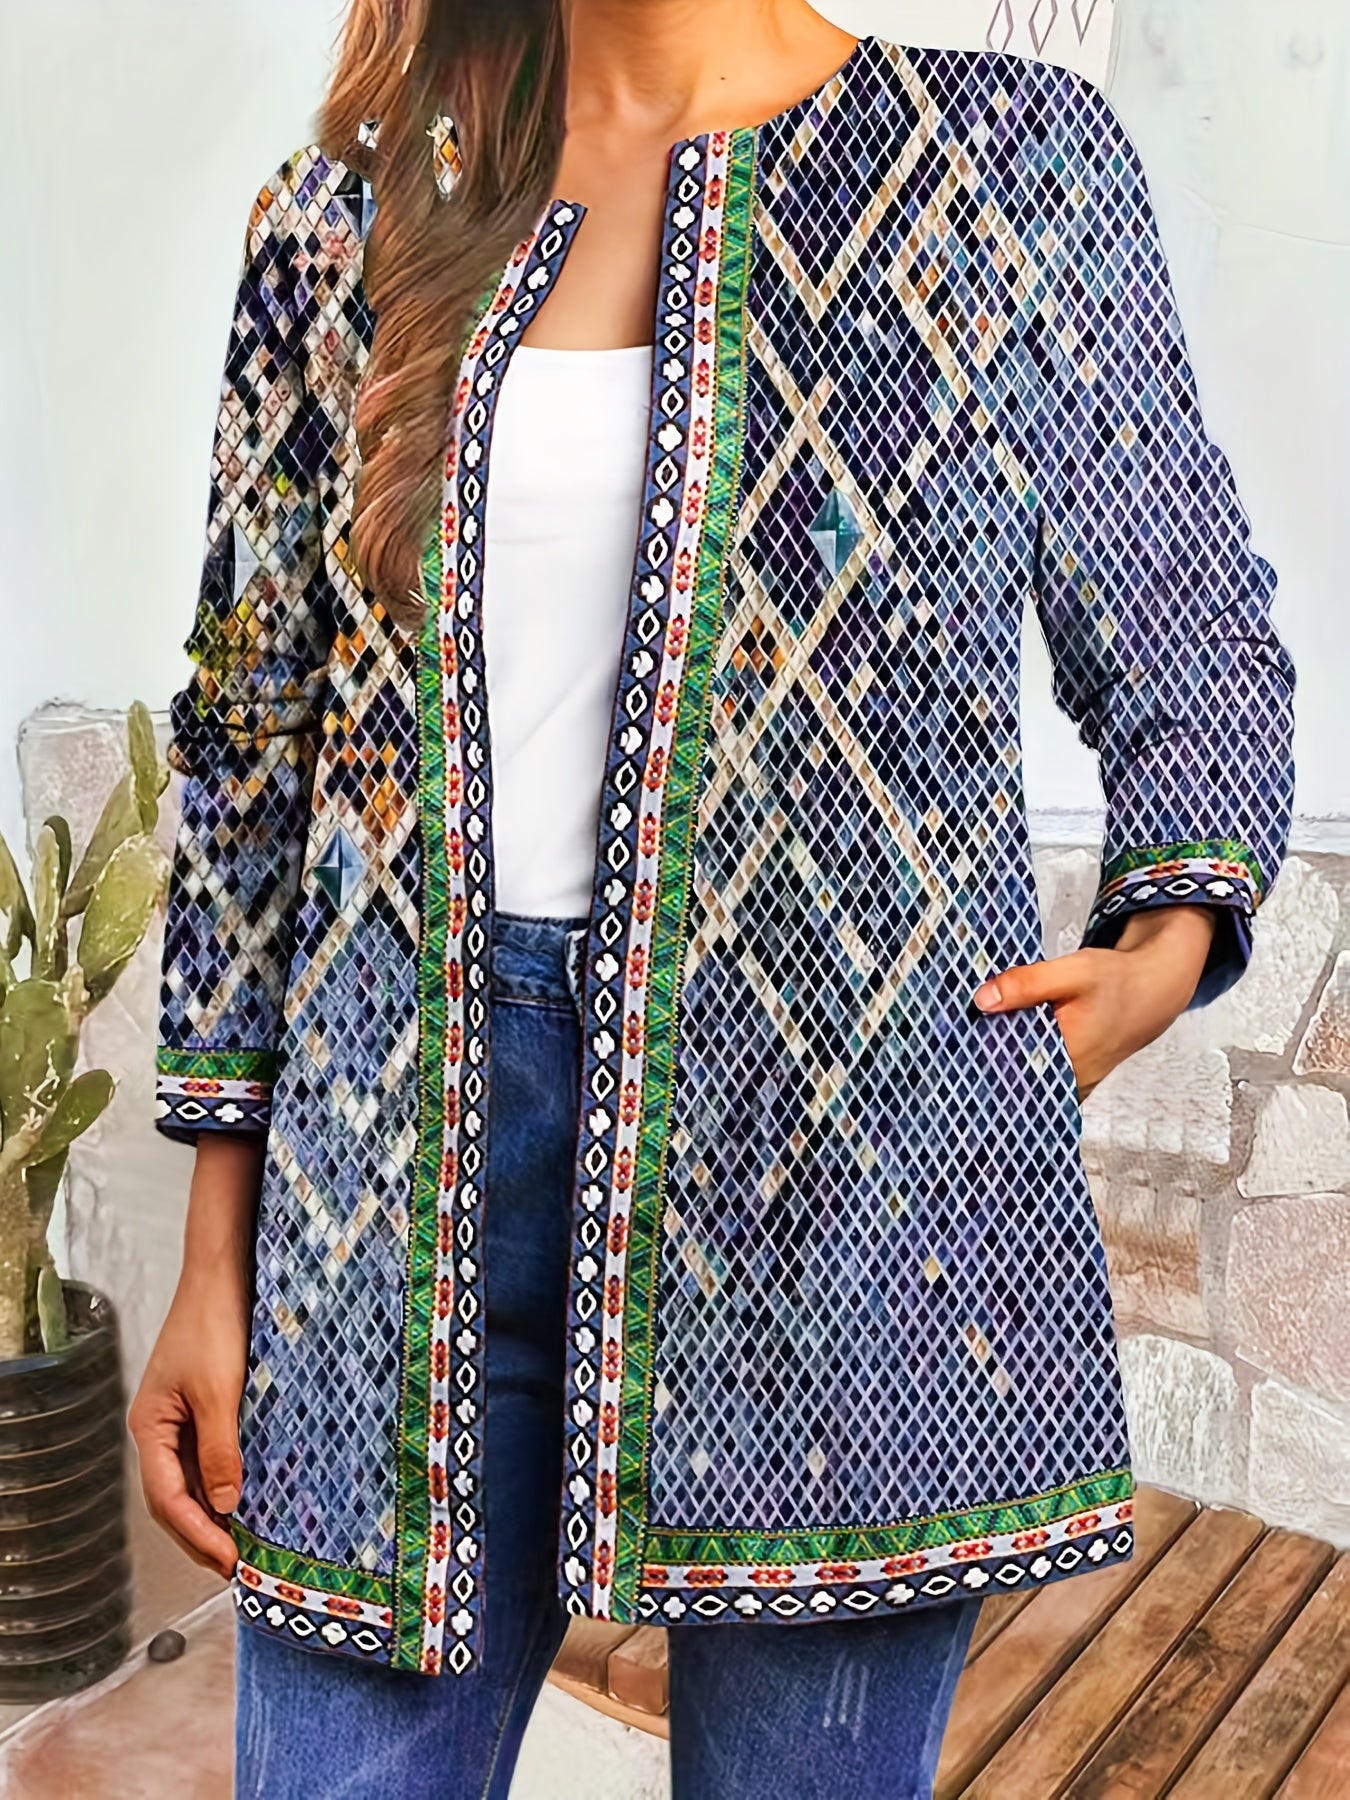 Ethnic Print Open Front Jacket, Vintage Long Sleeve Crew Neck Outerwear, Women's Clothing